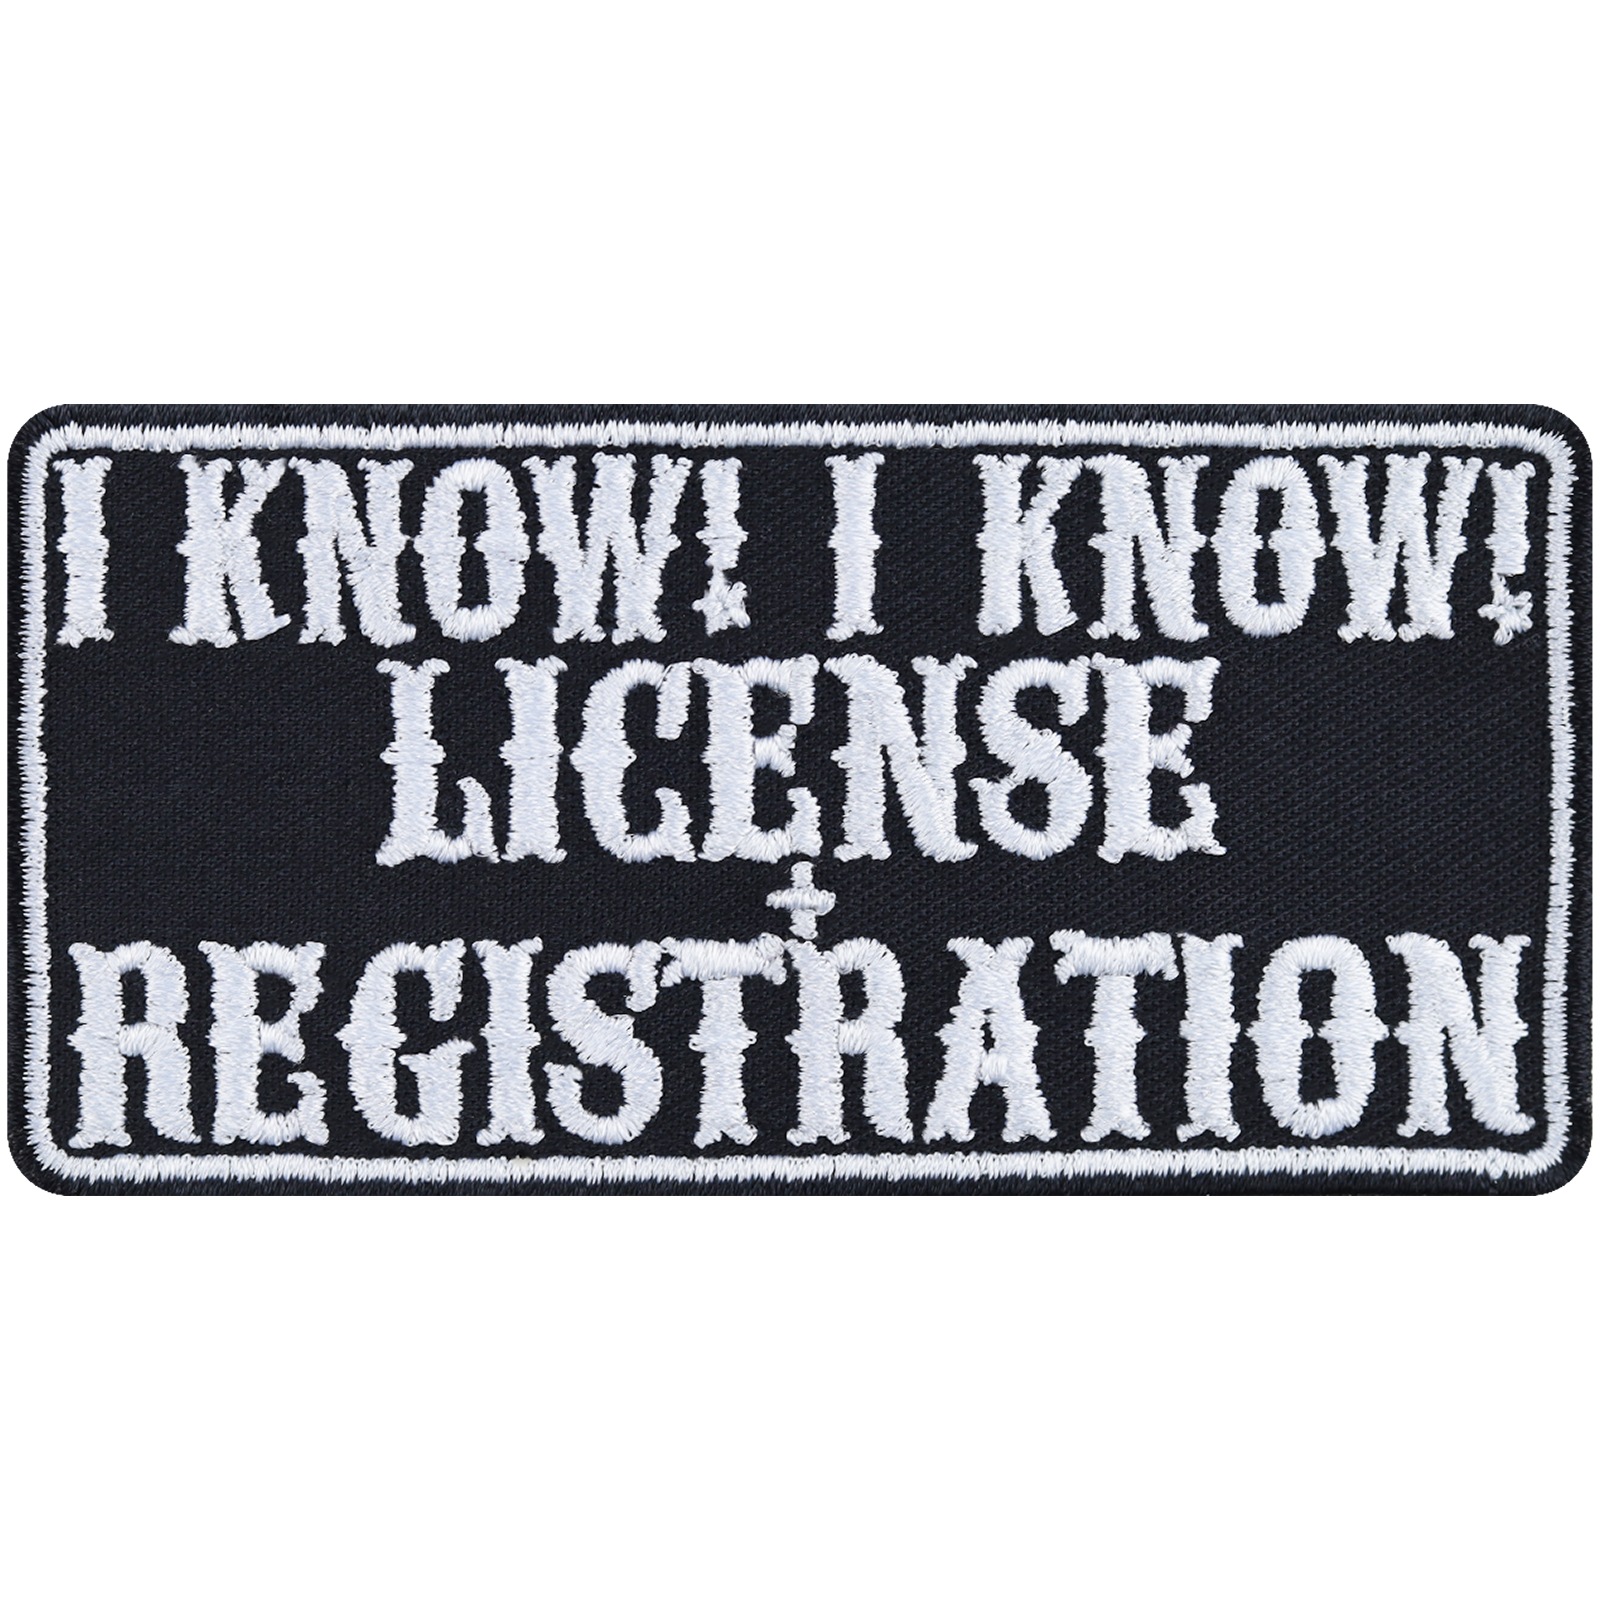 I Know! License and registration - Patch